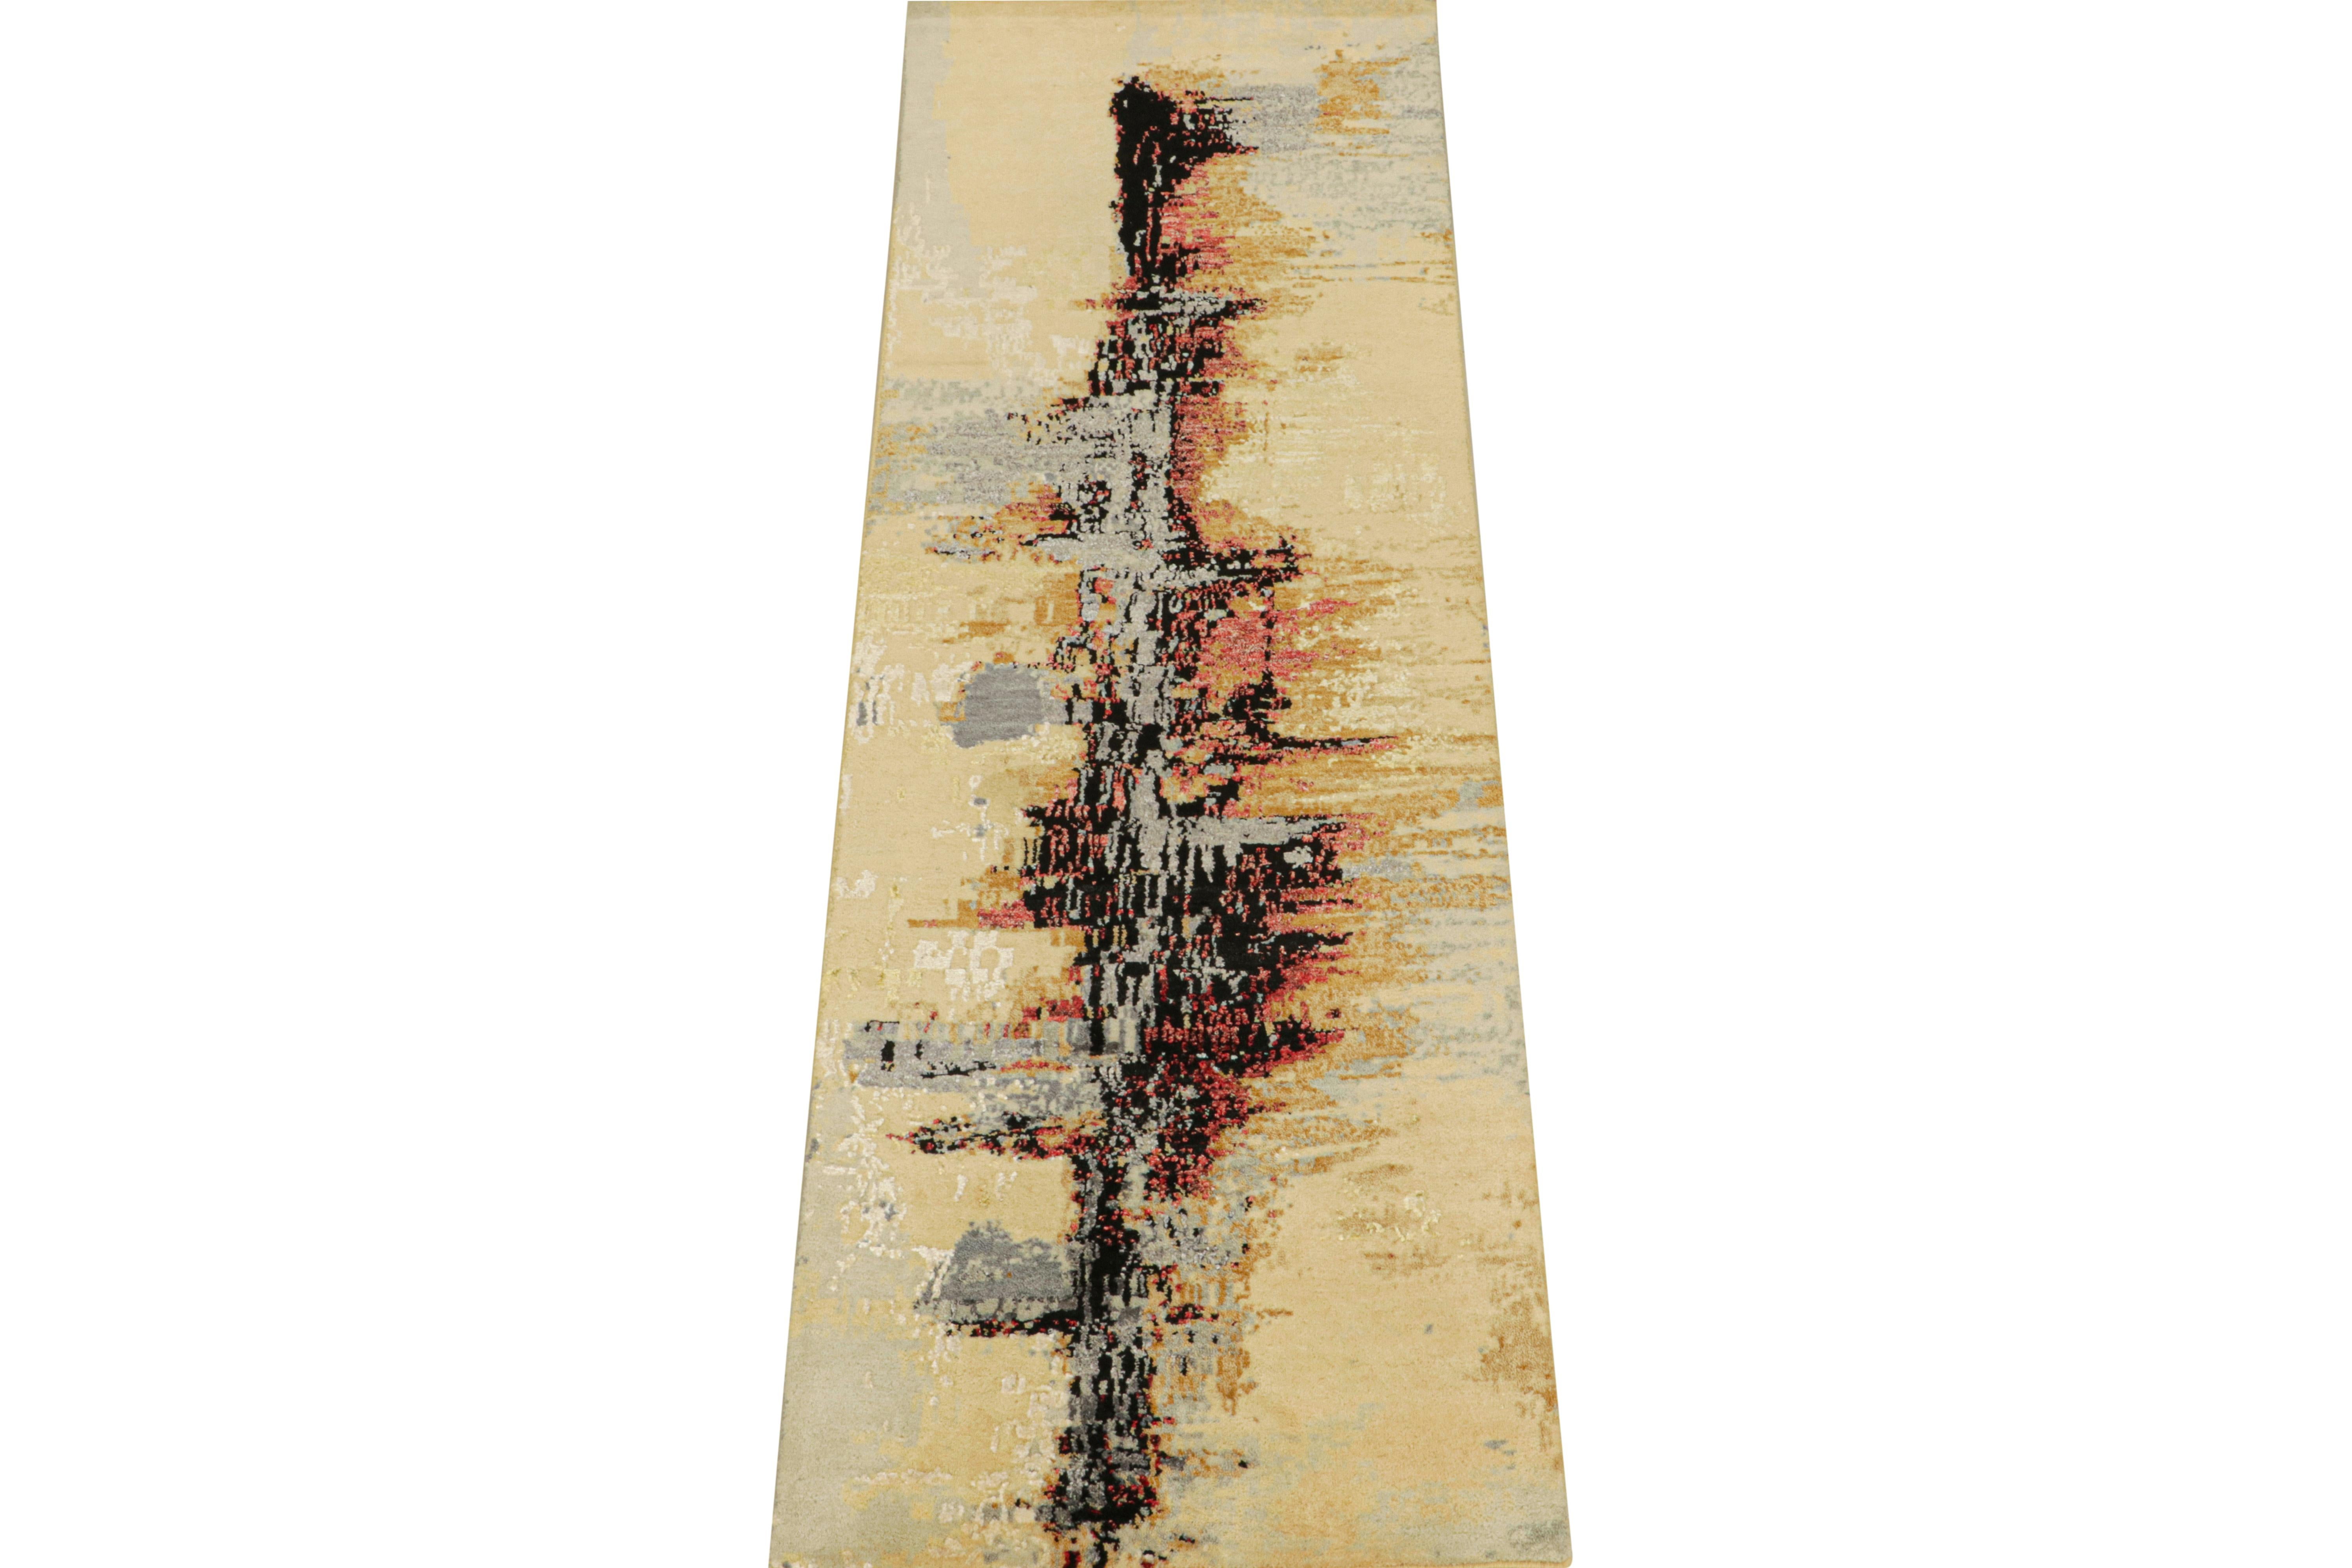 This abstract 3x8 runner is a bold new addition to Rug & Kilim’s Modern rug collection. Hand-knotted in wool,cotton and silk, its design explores expressionist sensibilities in a luxurious high-end quality. 

Further on the Design: 

This art rug